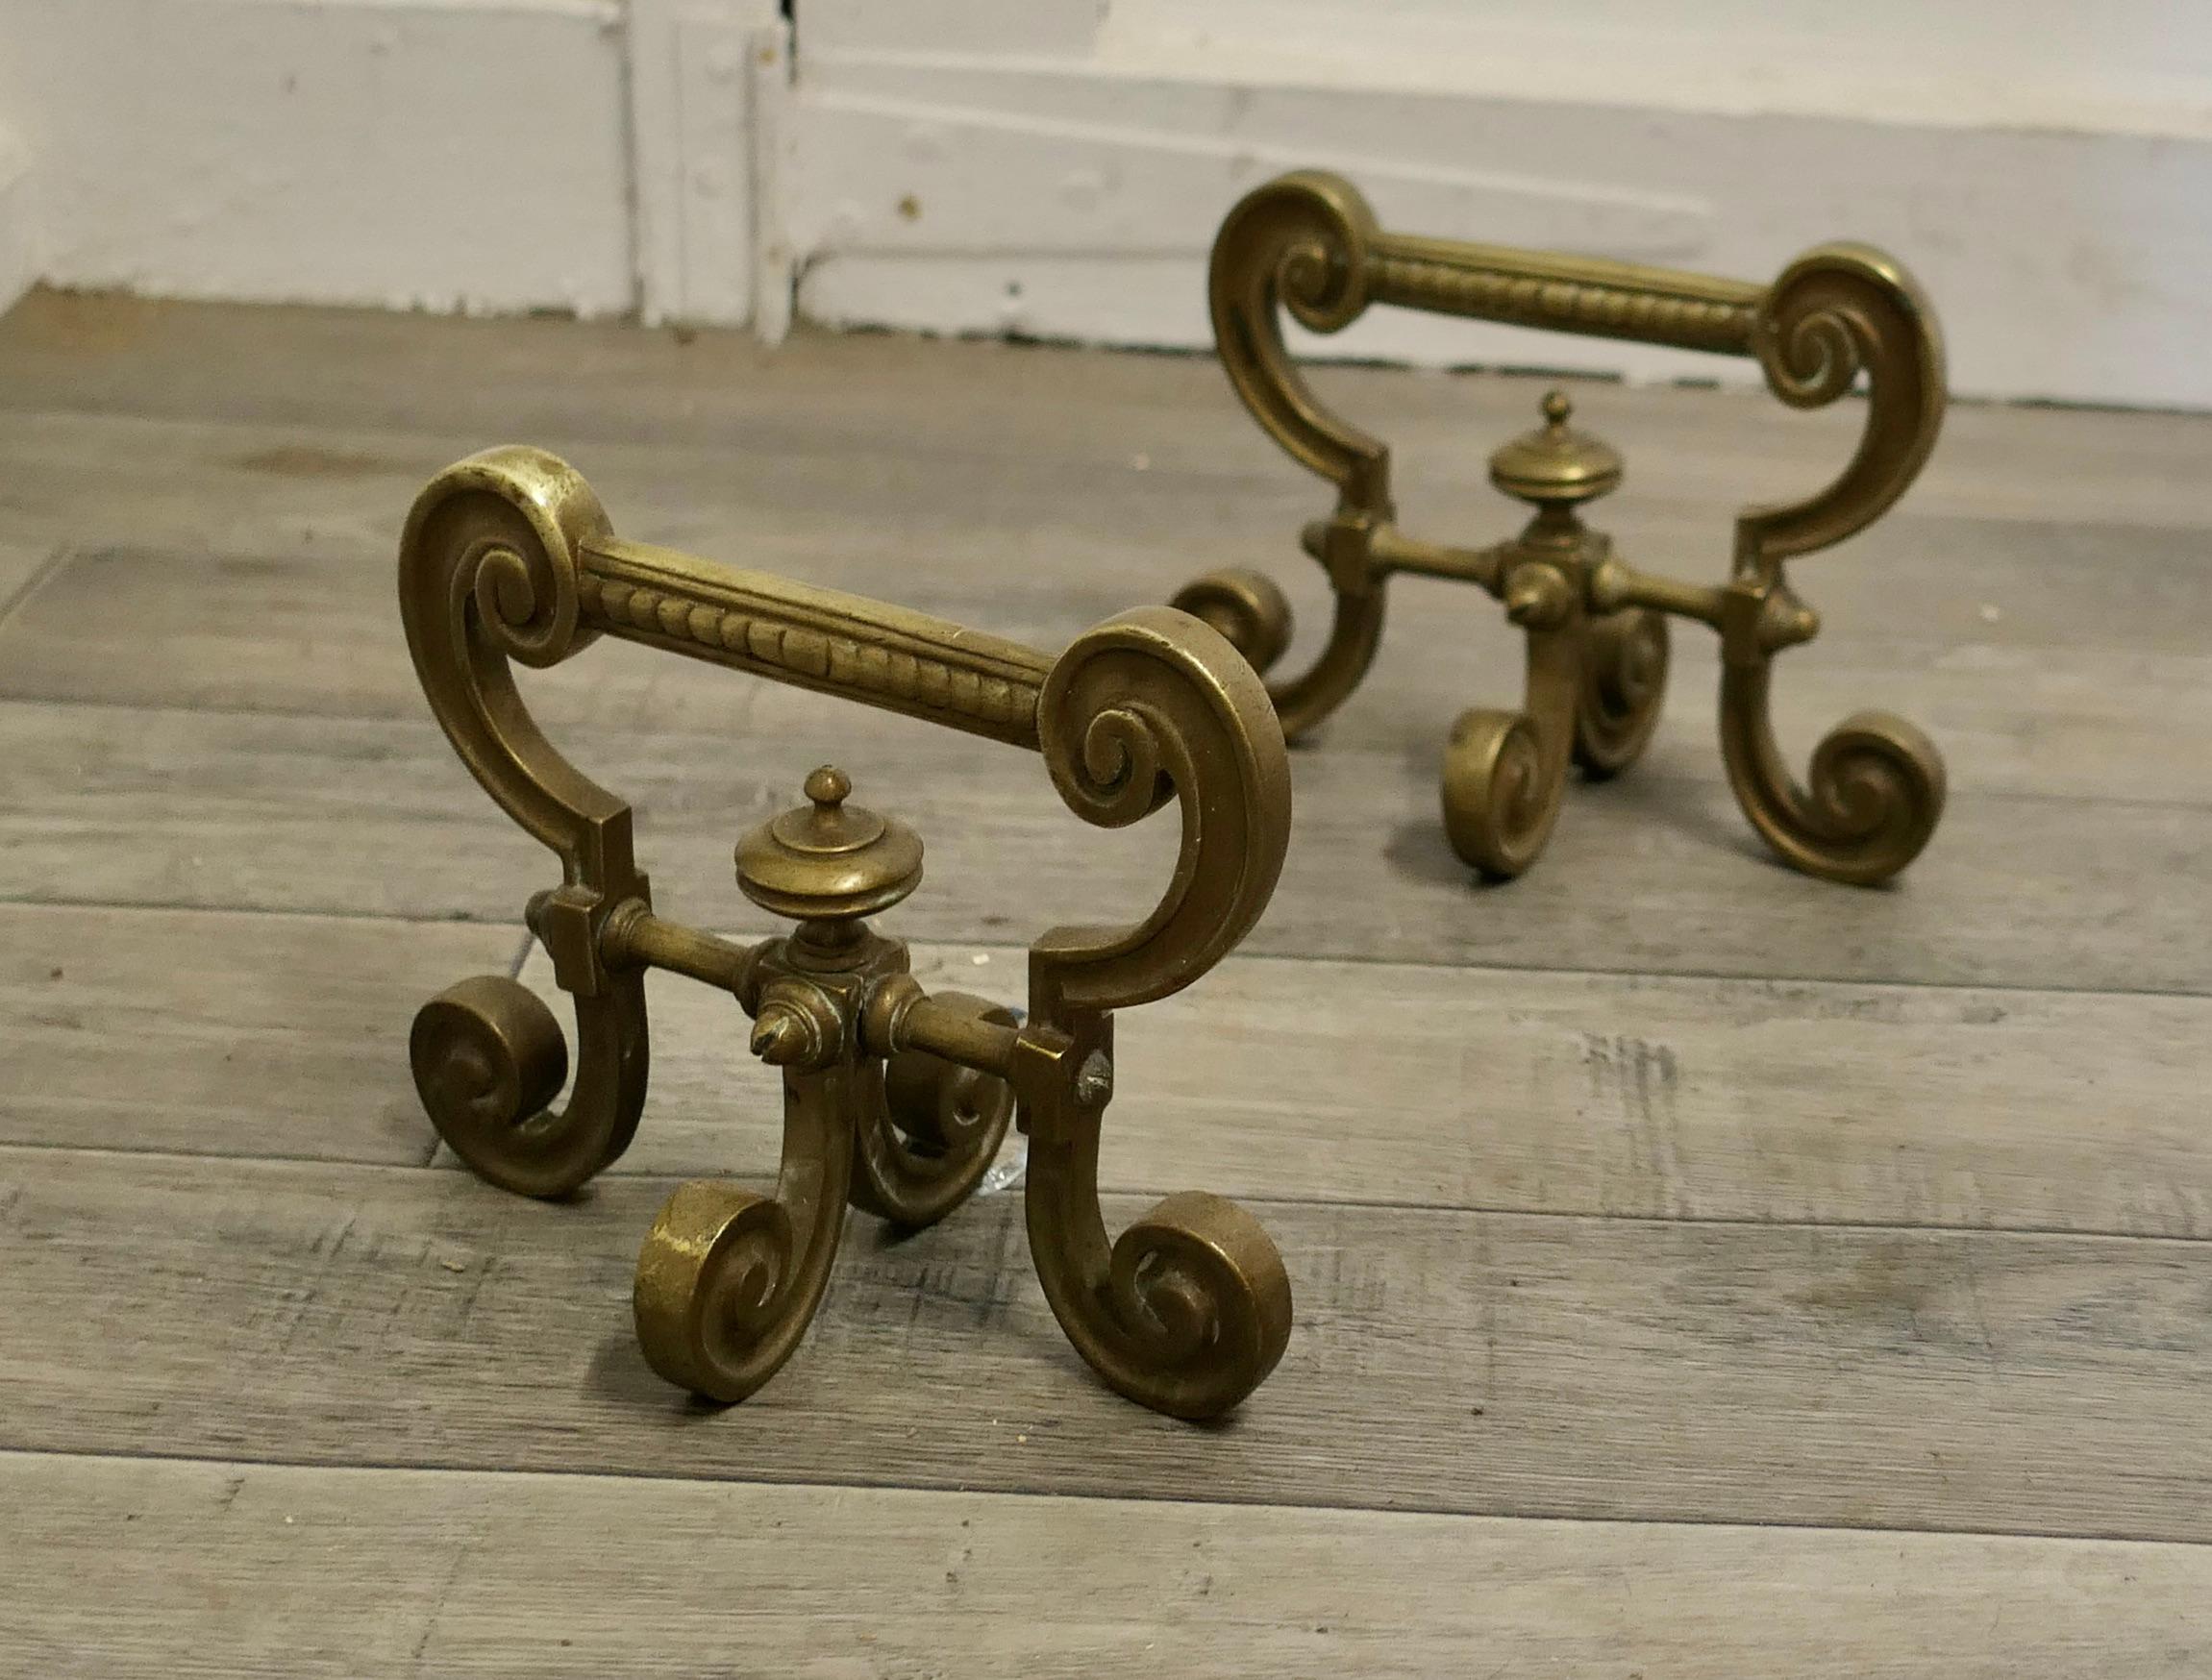 Very attractive pair of brass andirons, fire tool rests.

An elegant pair of 19th century andirons or fire dogs.
This very attractive pair of brass andirons are 11” high, 10” long and 10” wide across the front, they are in excellent used